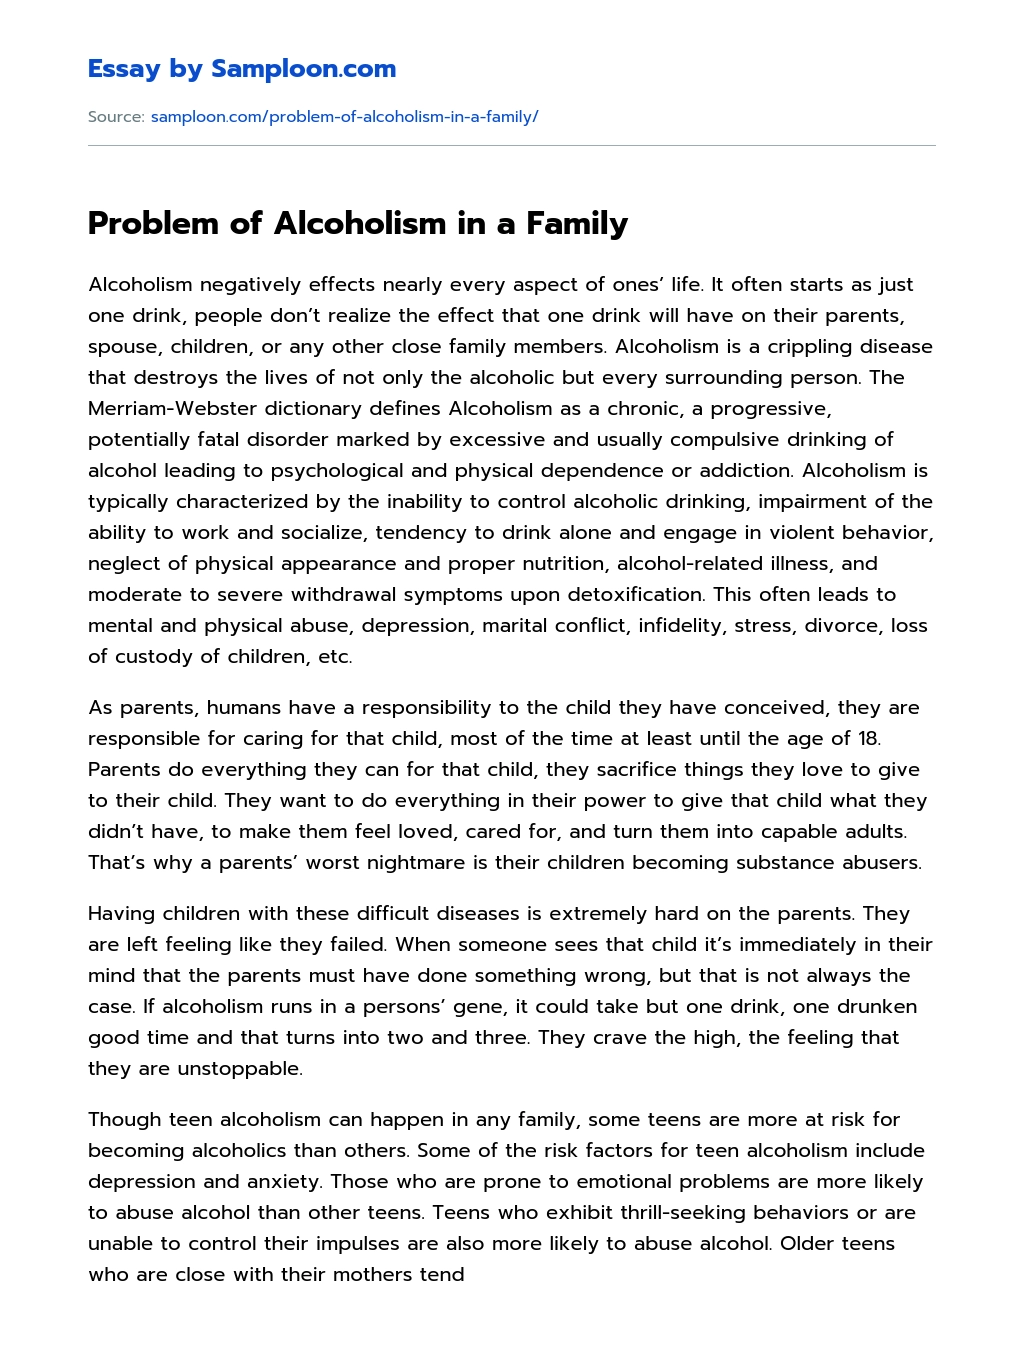 Problem of Alcoholism in a Family essay